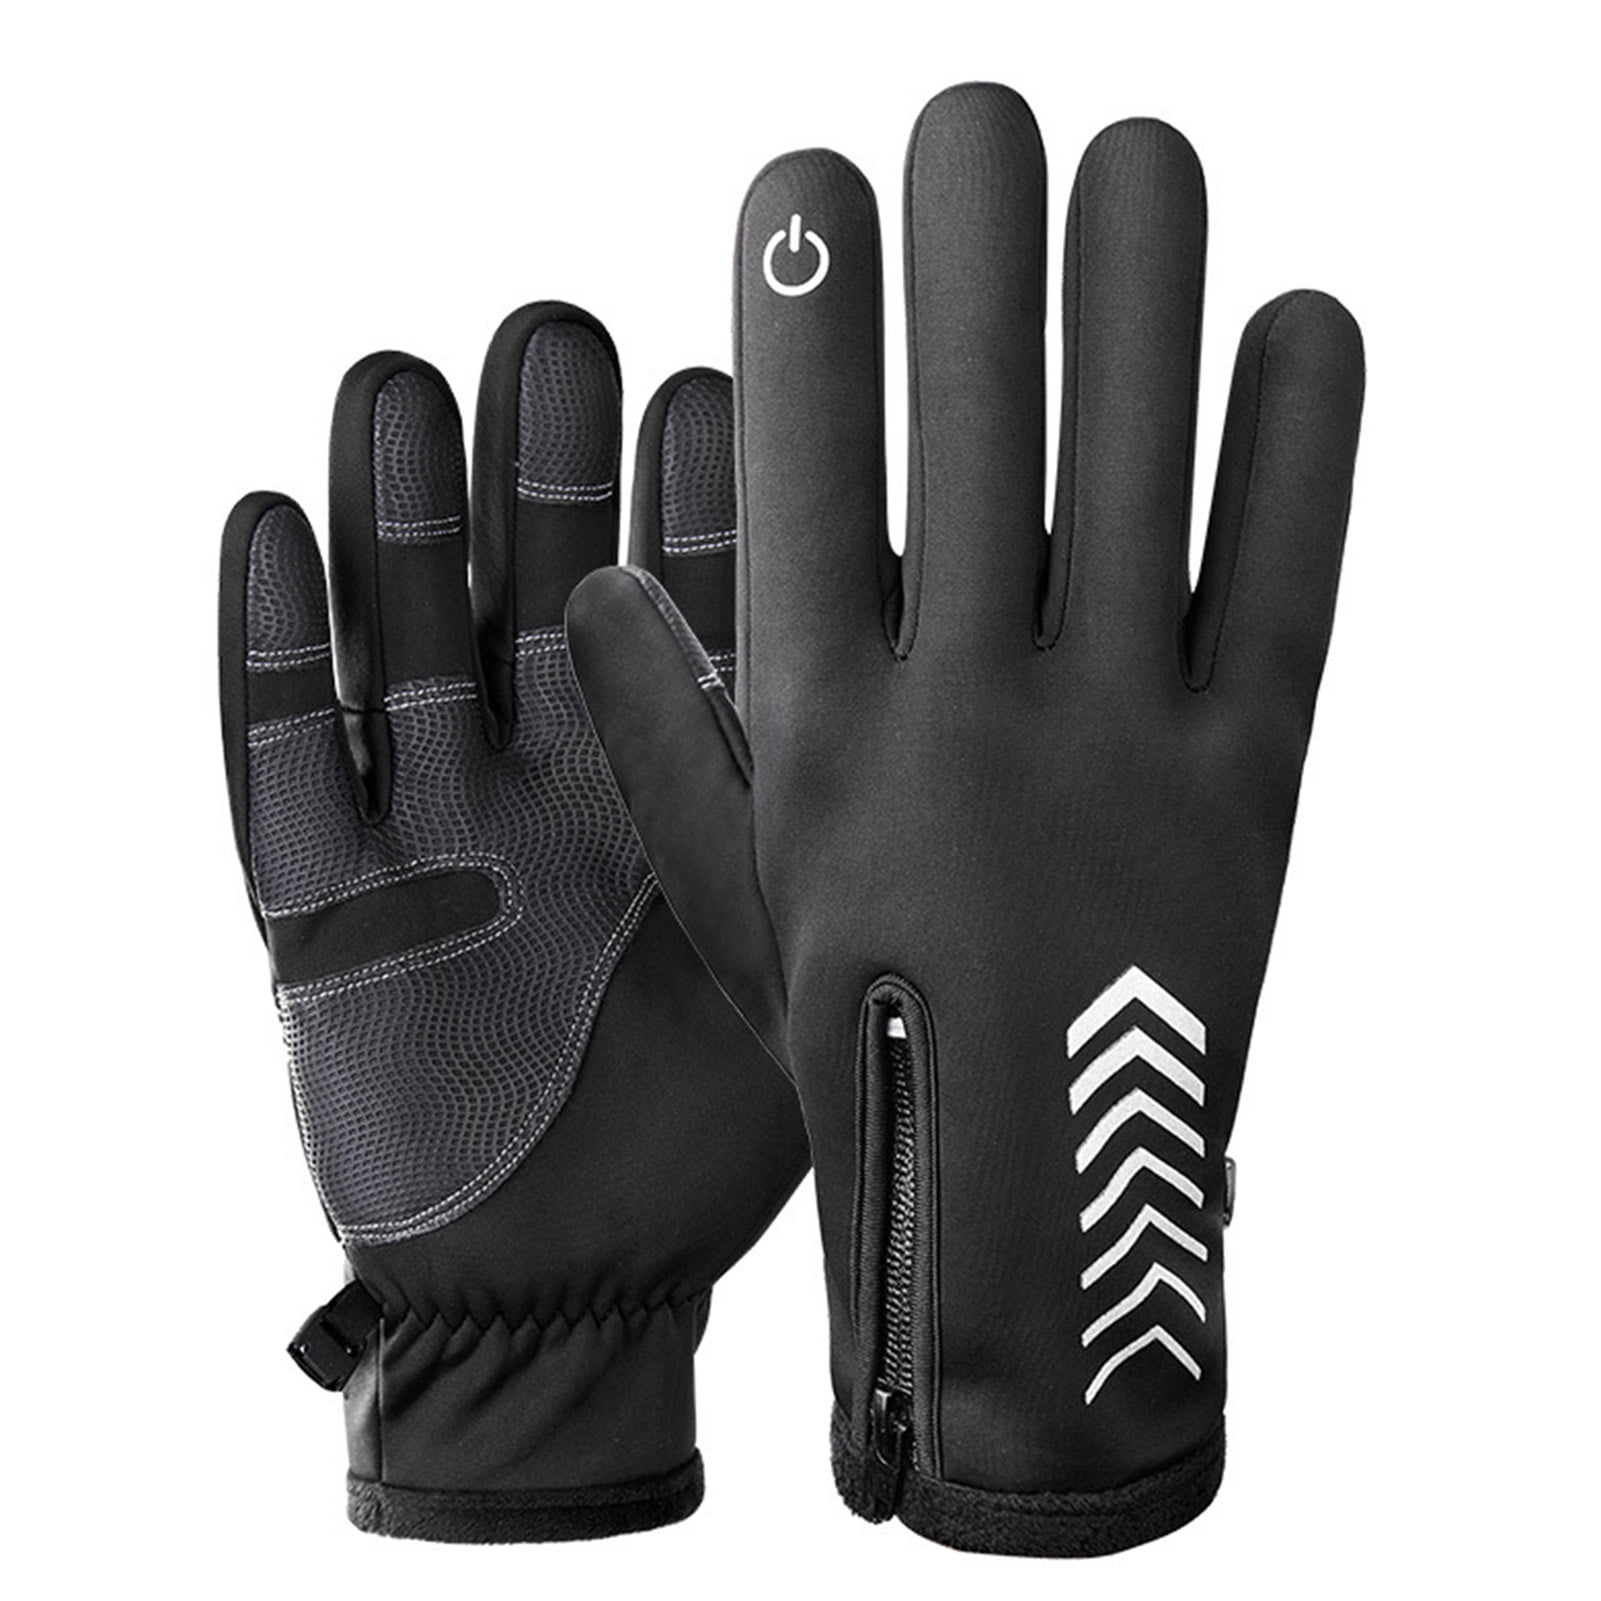 Wind-proof Waterproof Gloves Winter Touch Screen Ski Gloves Cycling Gloves Hot!